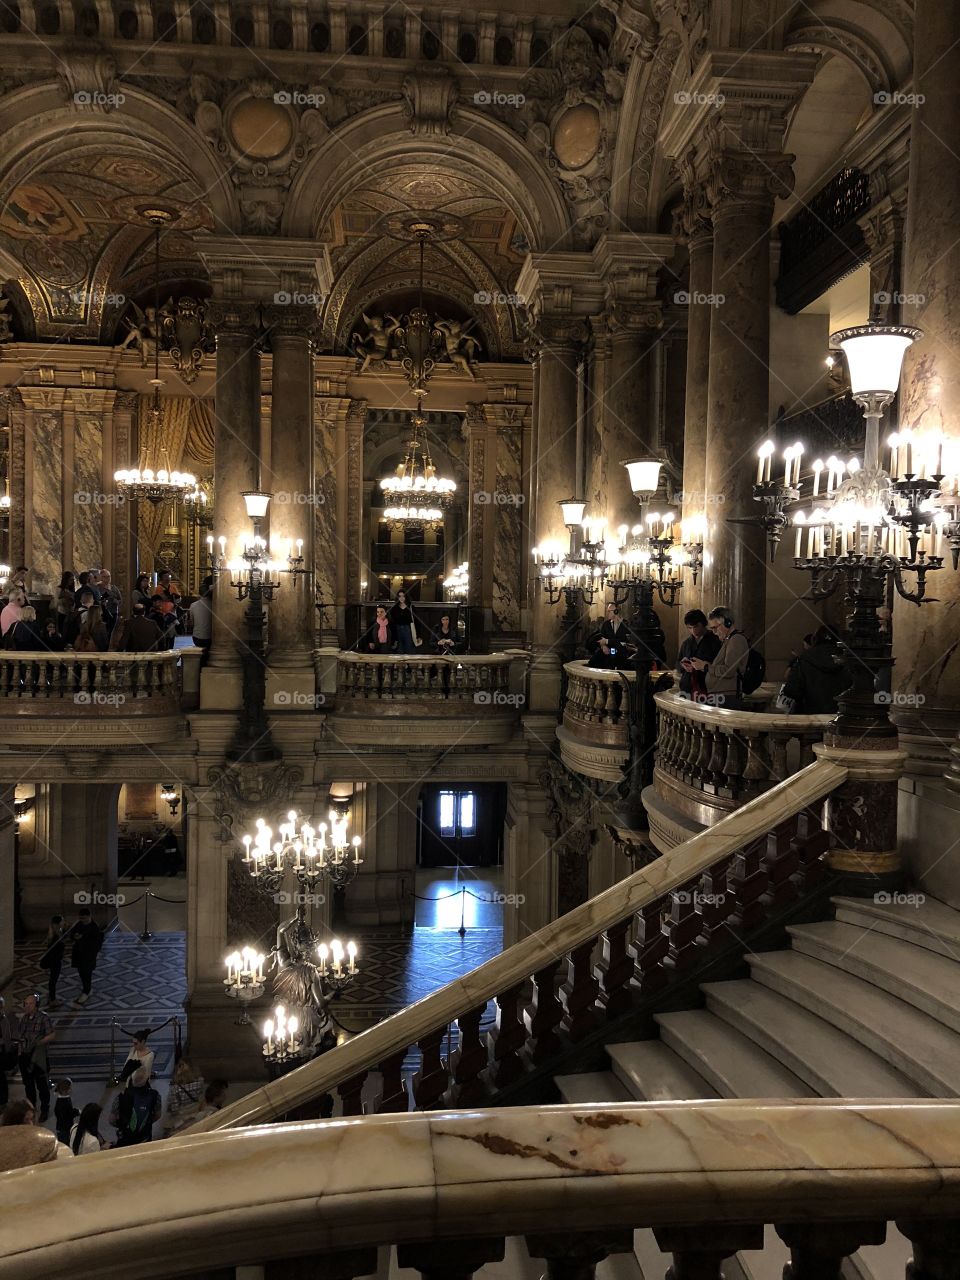 Another view of the grand staircase inside the Garnier Opera House in Paris, France.